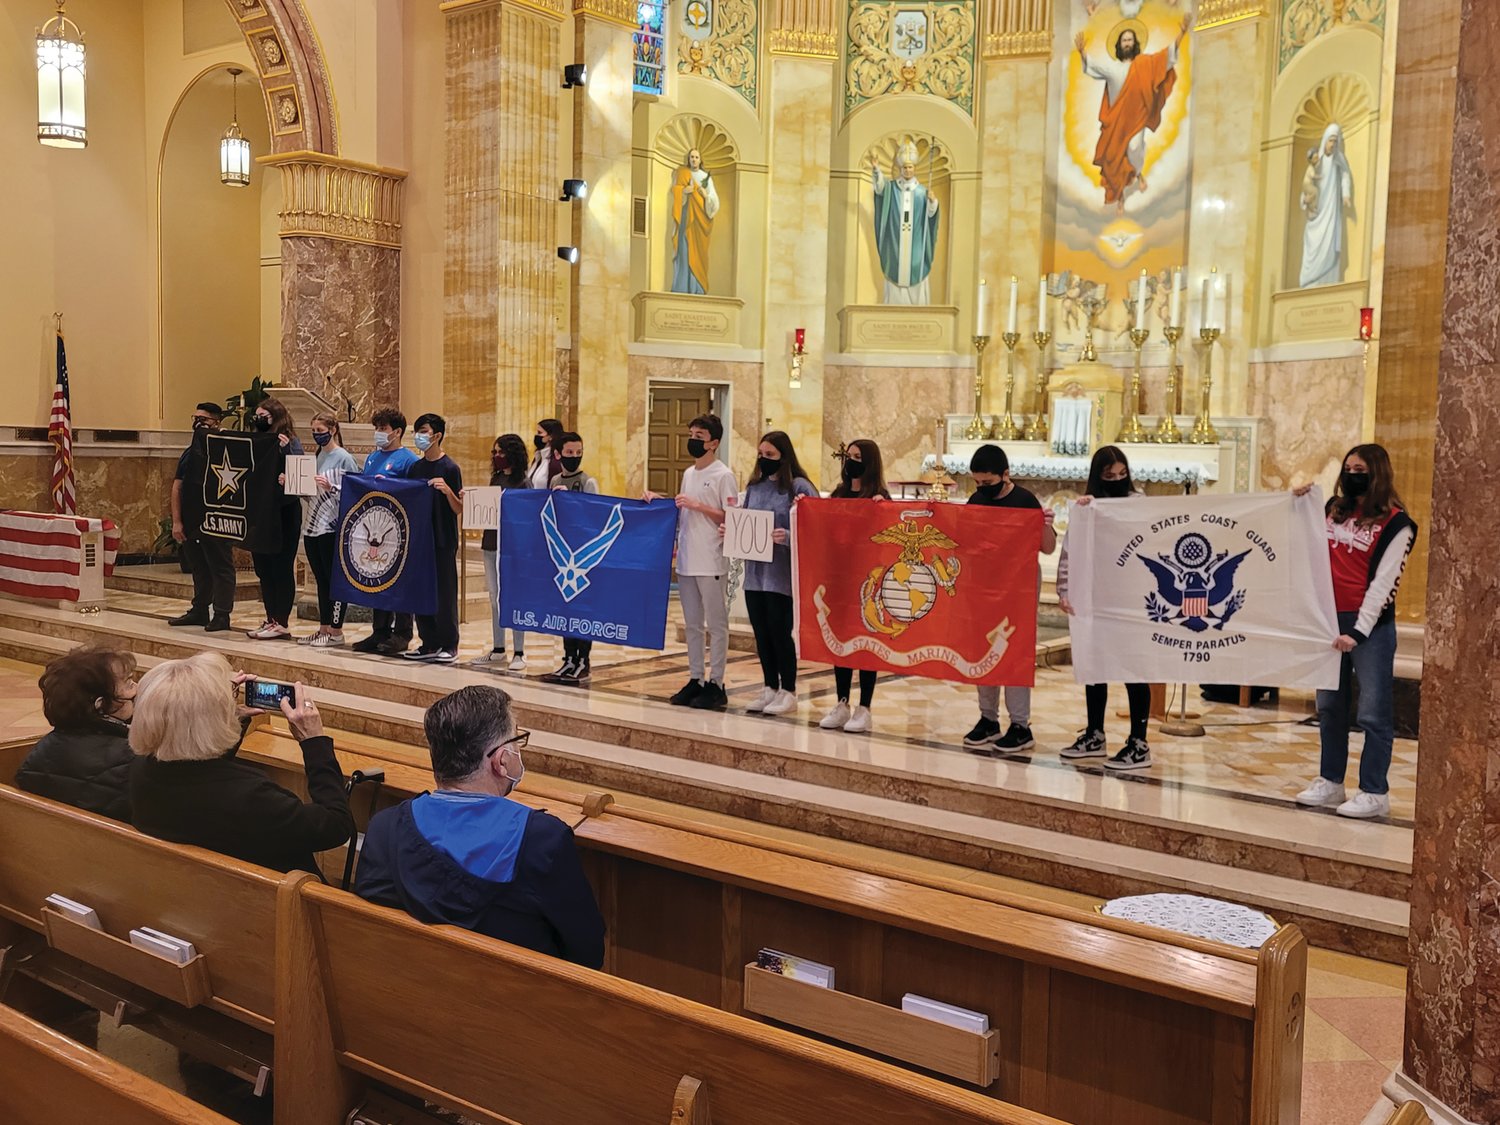 St. Rocco students helped carry five other flags, each representing a branch of the military — the U.S. Army, Navy, Marine Corps, Air Force and Coast Guard — to the front of the church.